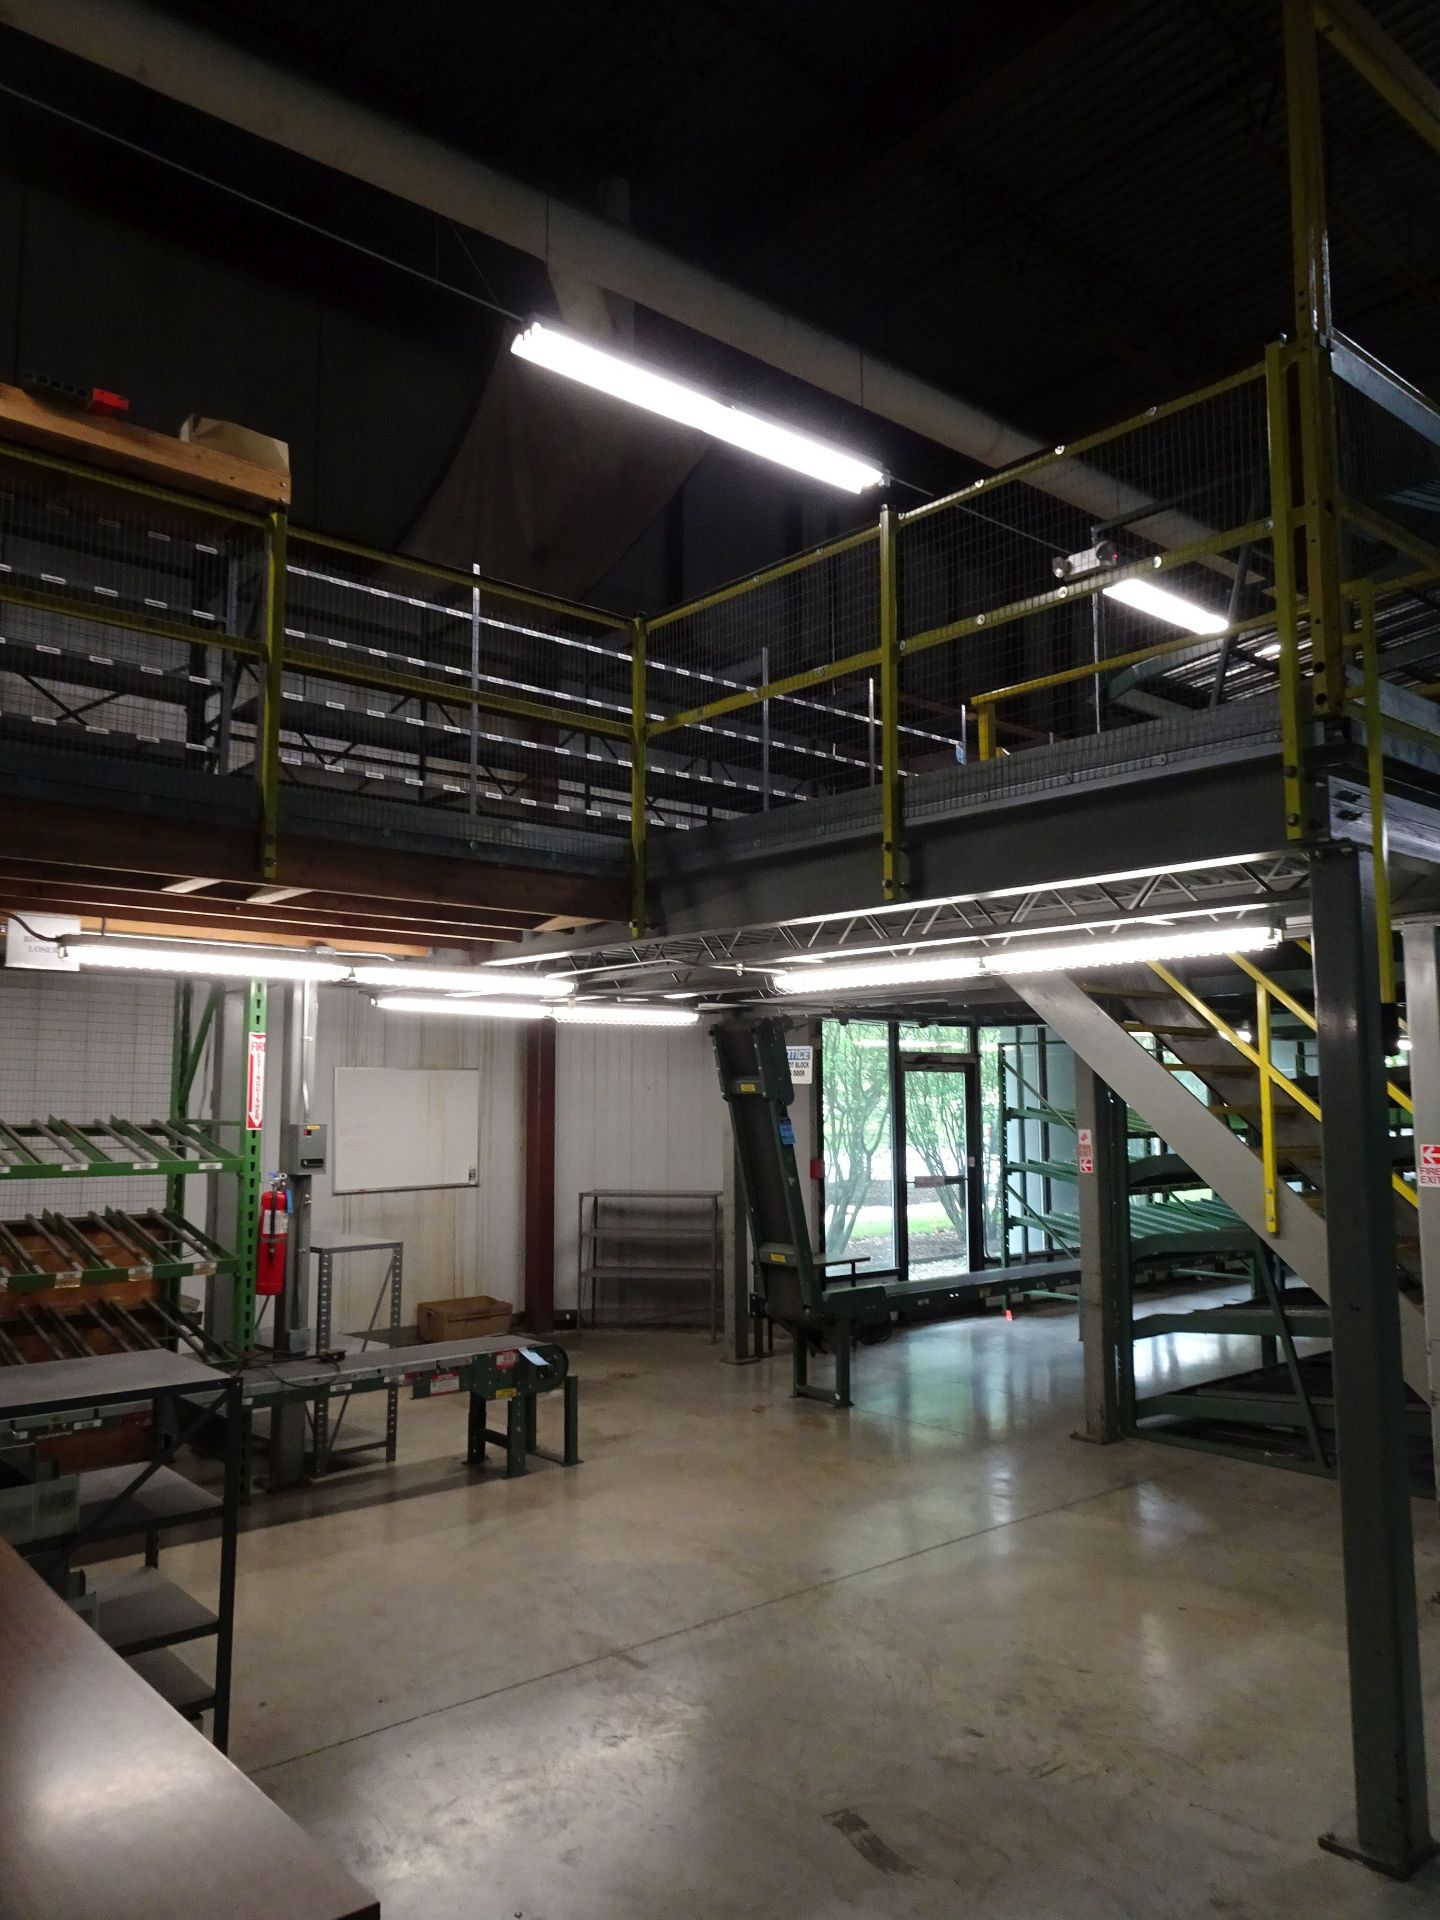 25' WIDE X 235' LONG TWO-STORY SPACE LOFT MEZZANINE WITH (24) SECTIONS 60" WIDE X 128" DEEP X 19' - Image 2 of 10